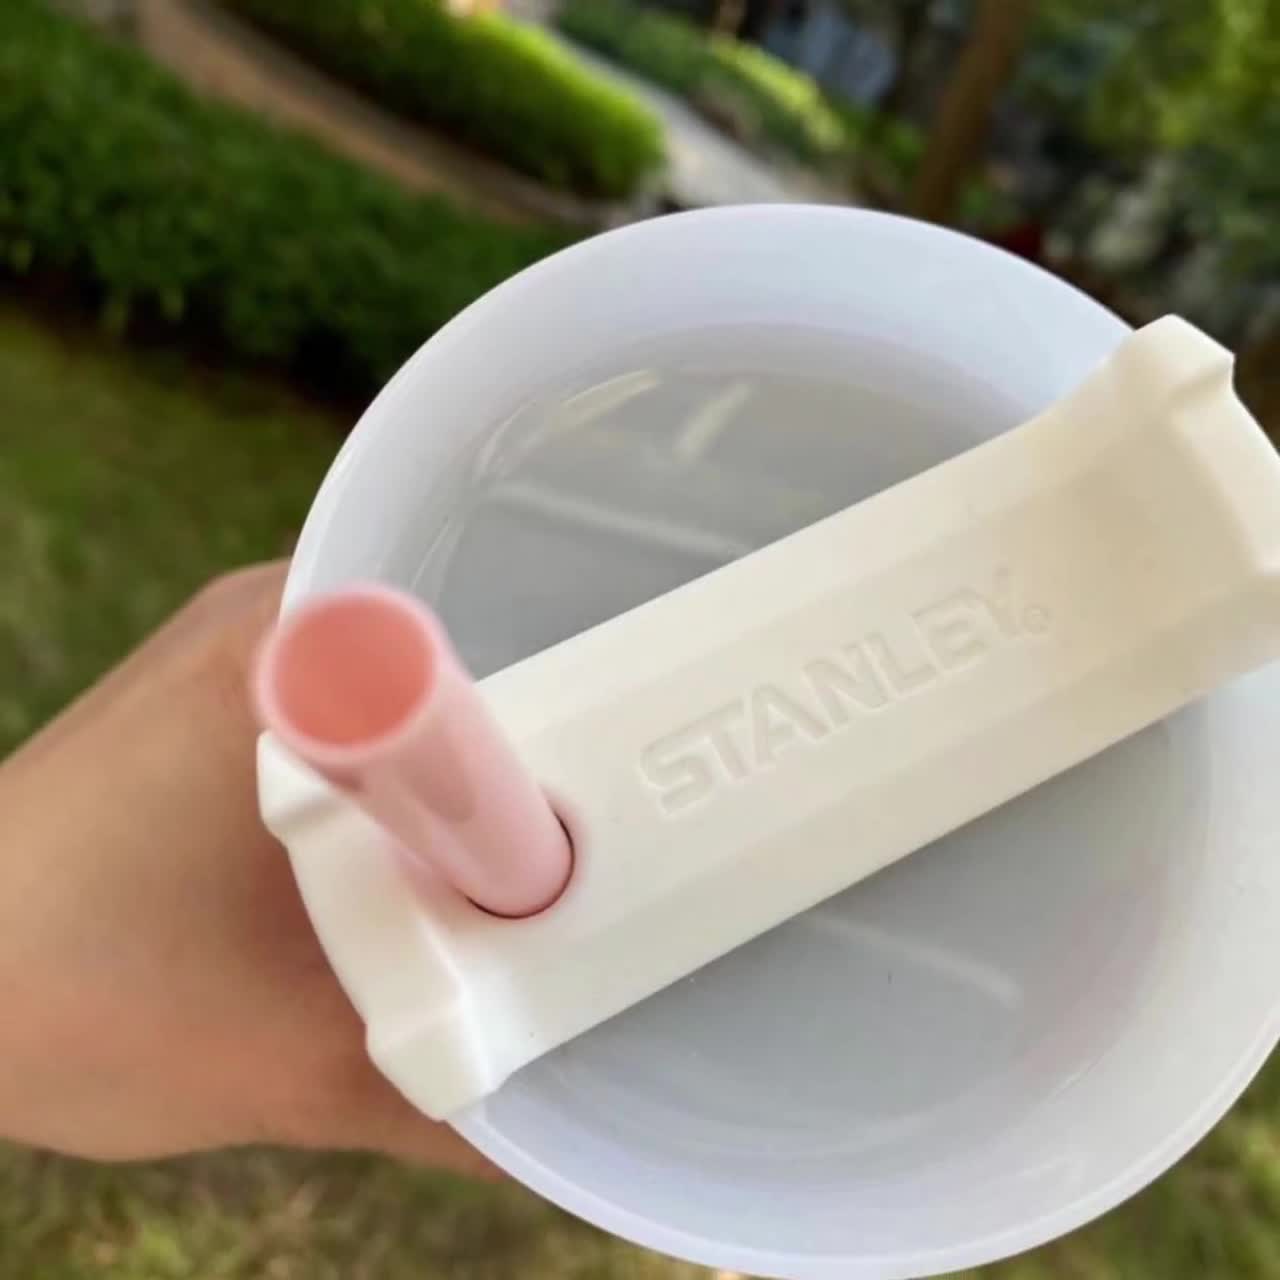 https://v.etsystatic.com/video/upload/q_auto/Starbucks_Stanley_Tumbler_Cup_Durable_and_Stylish_for_On-the-Go_Cherry_Blossom_Pink_Great_Gift_Idea_qozbnv.jpg